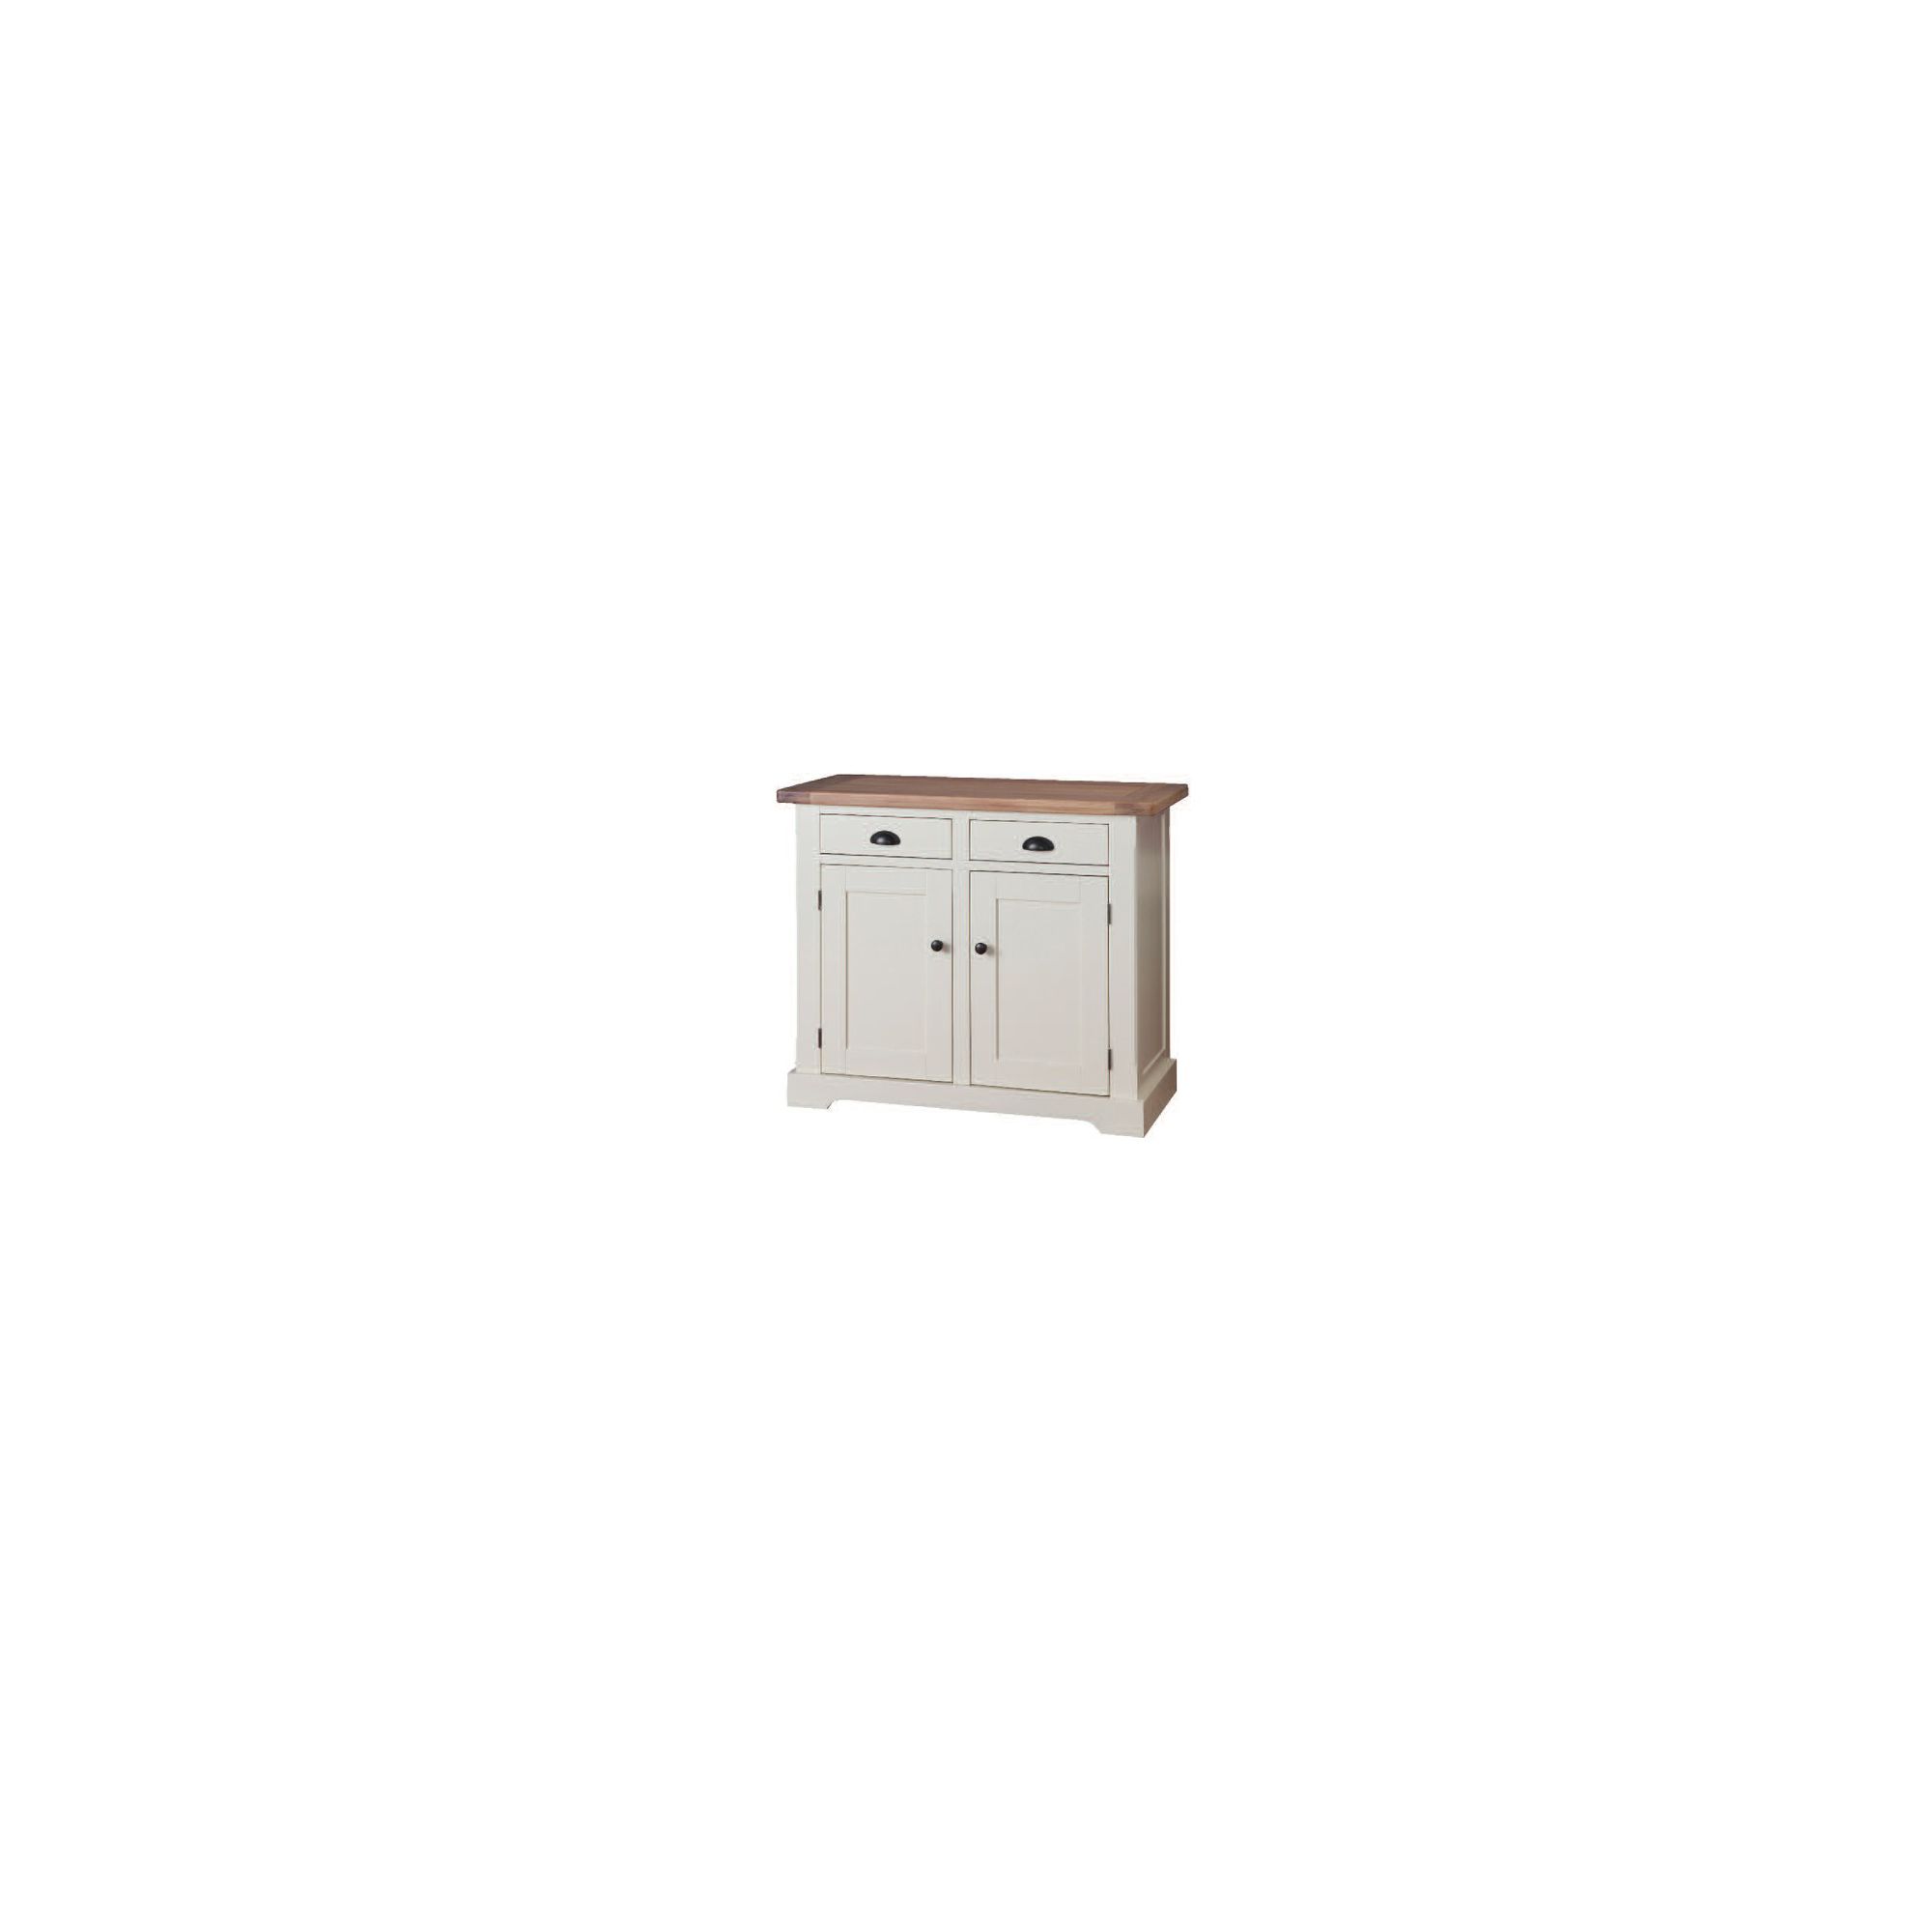 Wilkinson Furniture Buttermere Two Drawer Small Sideboard in Ivory at Tesco Direct